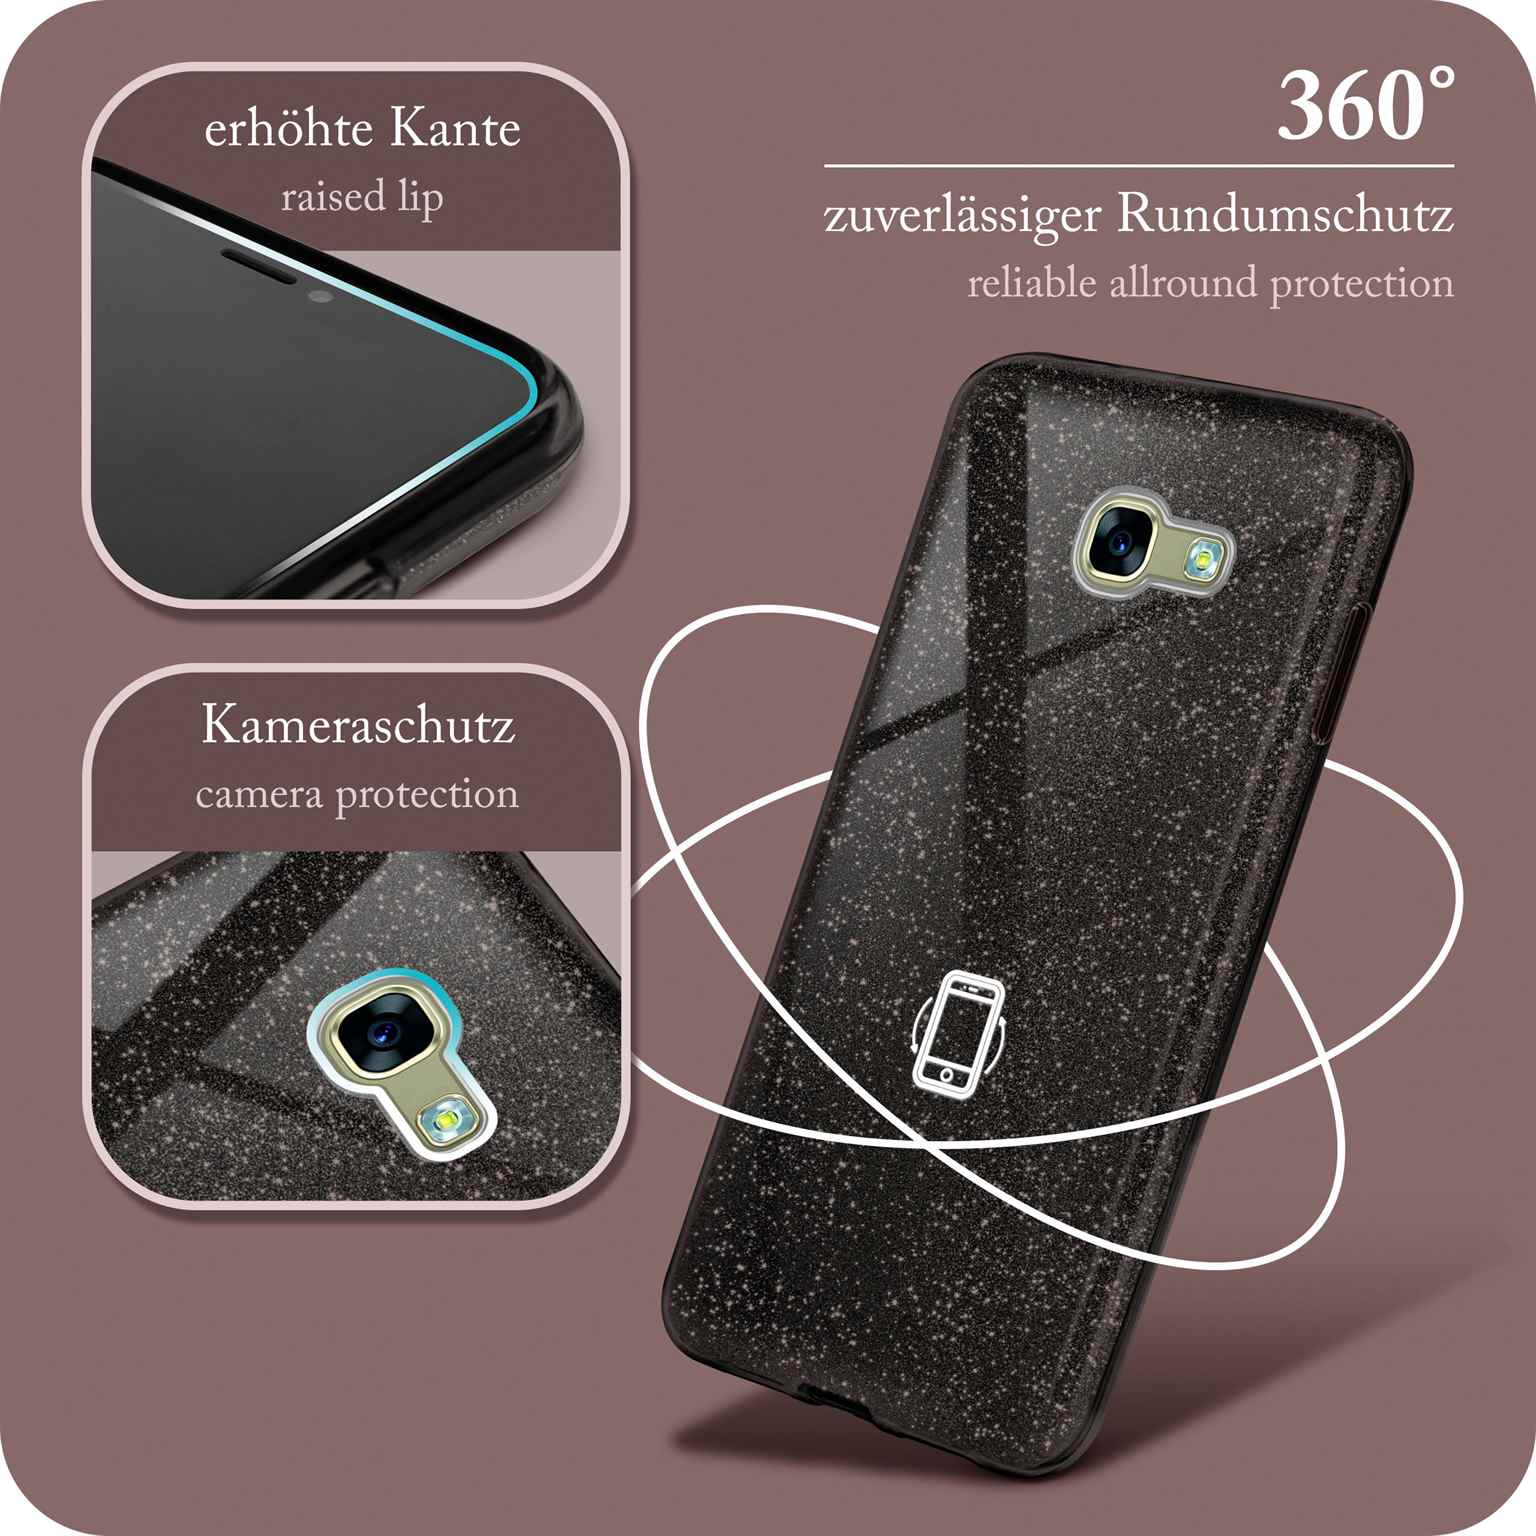 Samsung, Glitter Case, A5 ONEFLOW (2017), Black Galaxy - Backcover, Glamour